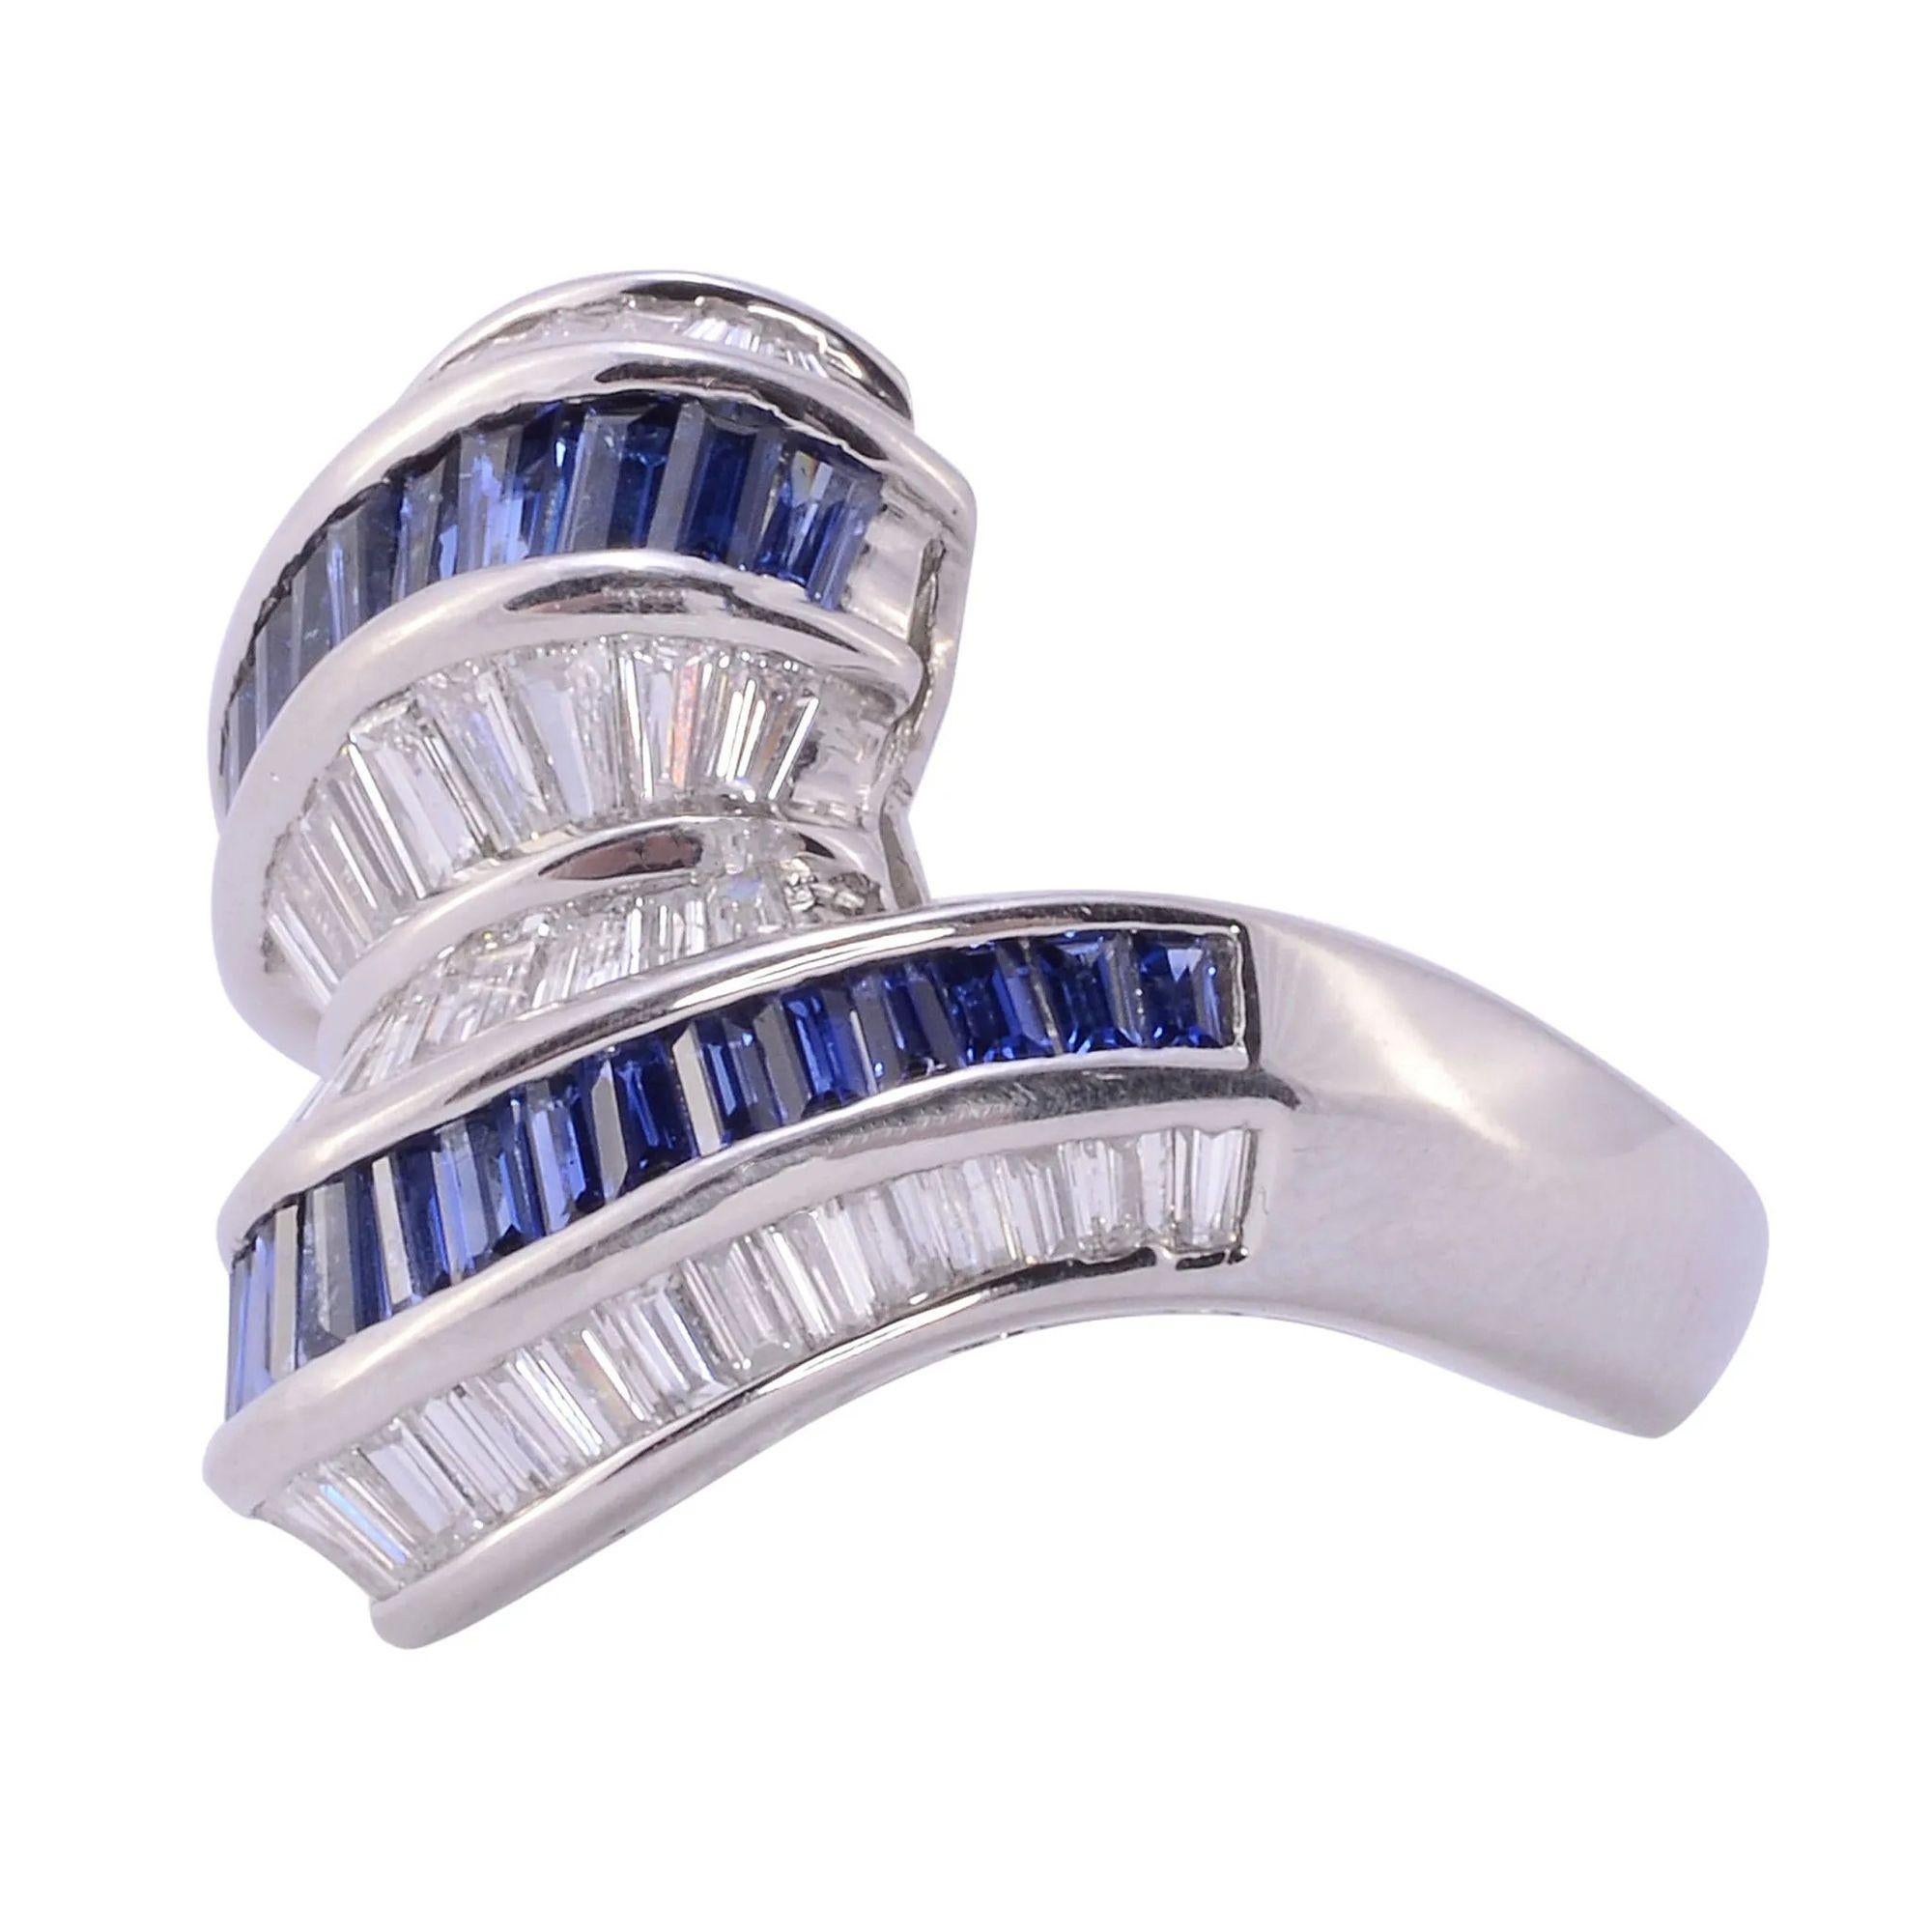 Estate baguette sapphire & diamond platinum ring. This platinum ring features 57 tapered diamonds at 1.29 carat total weight having SI clarity and G-H color. There are also 32 baguette sapphires at 1.34 carat total weight. This sapphire & diamond